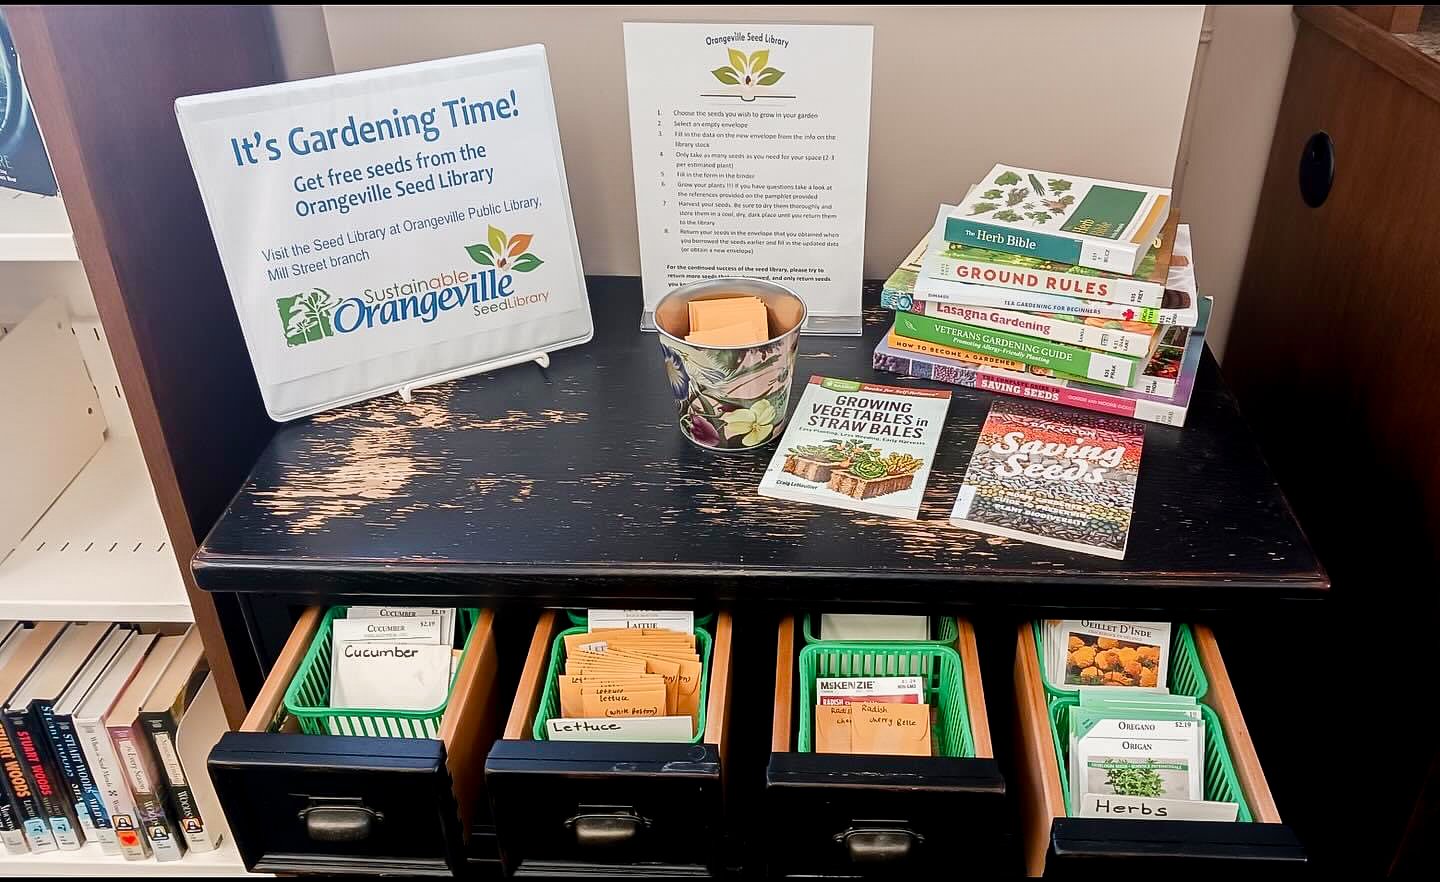 A picture of a seed library set up on an old library card filing desk. Seed envelopes are in the drawers with labels on them, with books, a binder, and a sign on top of the desk.